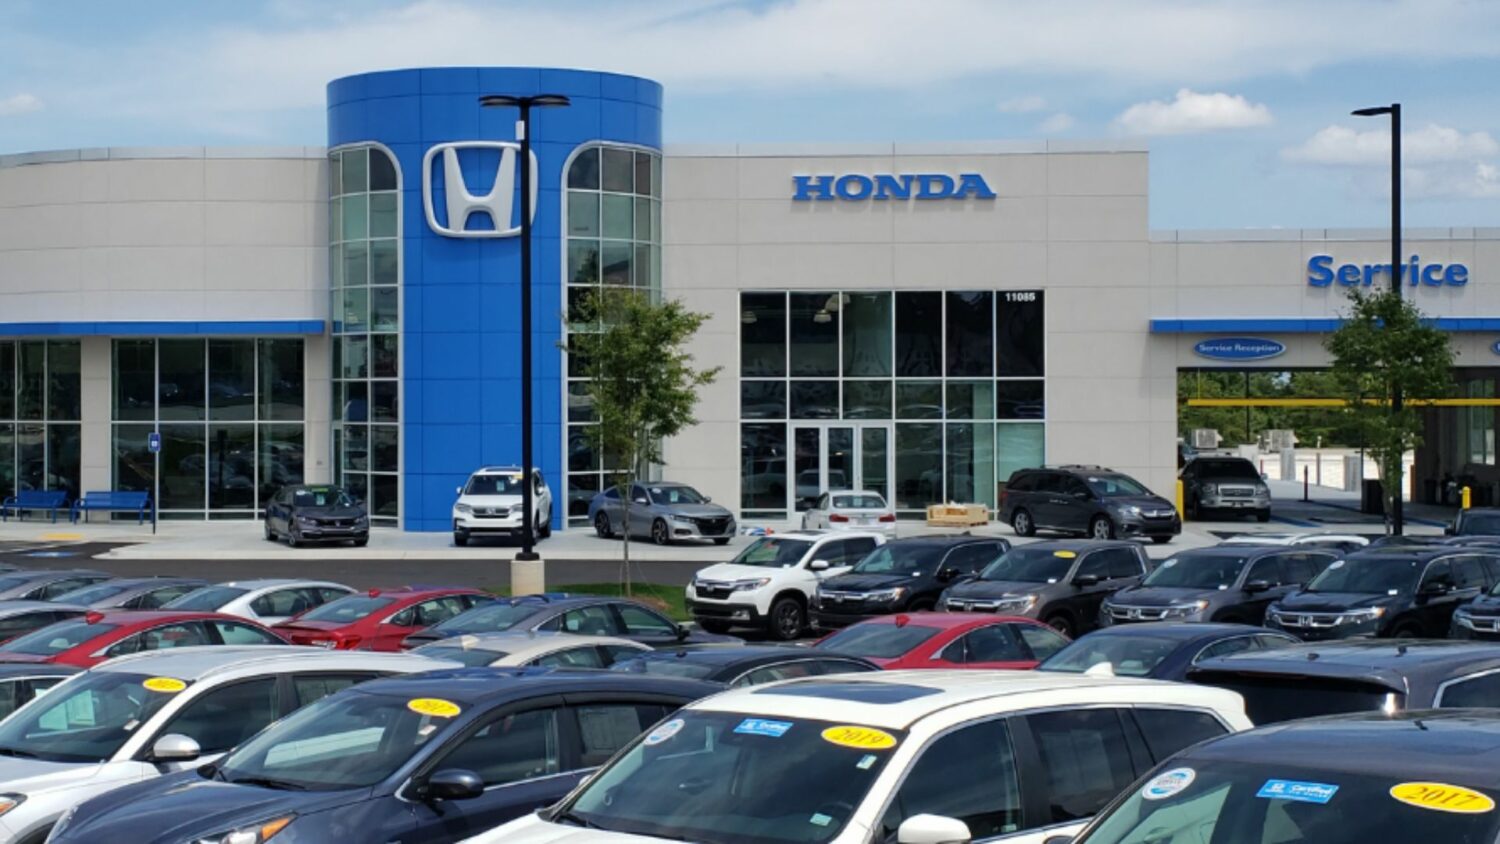 In the most recent quarter, Honda's operating profit increased by 78% as improved semiconductor supply and sales jumped for the automaker.